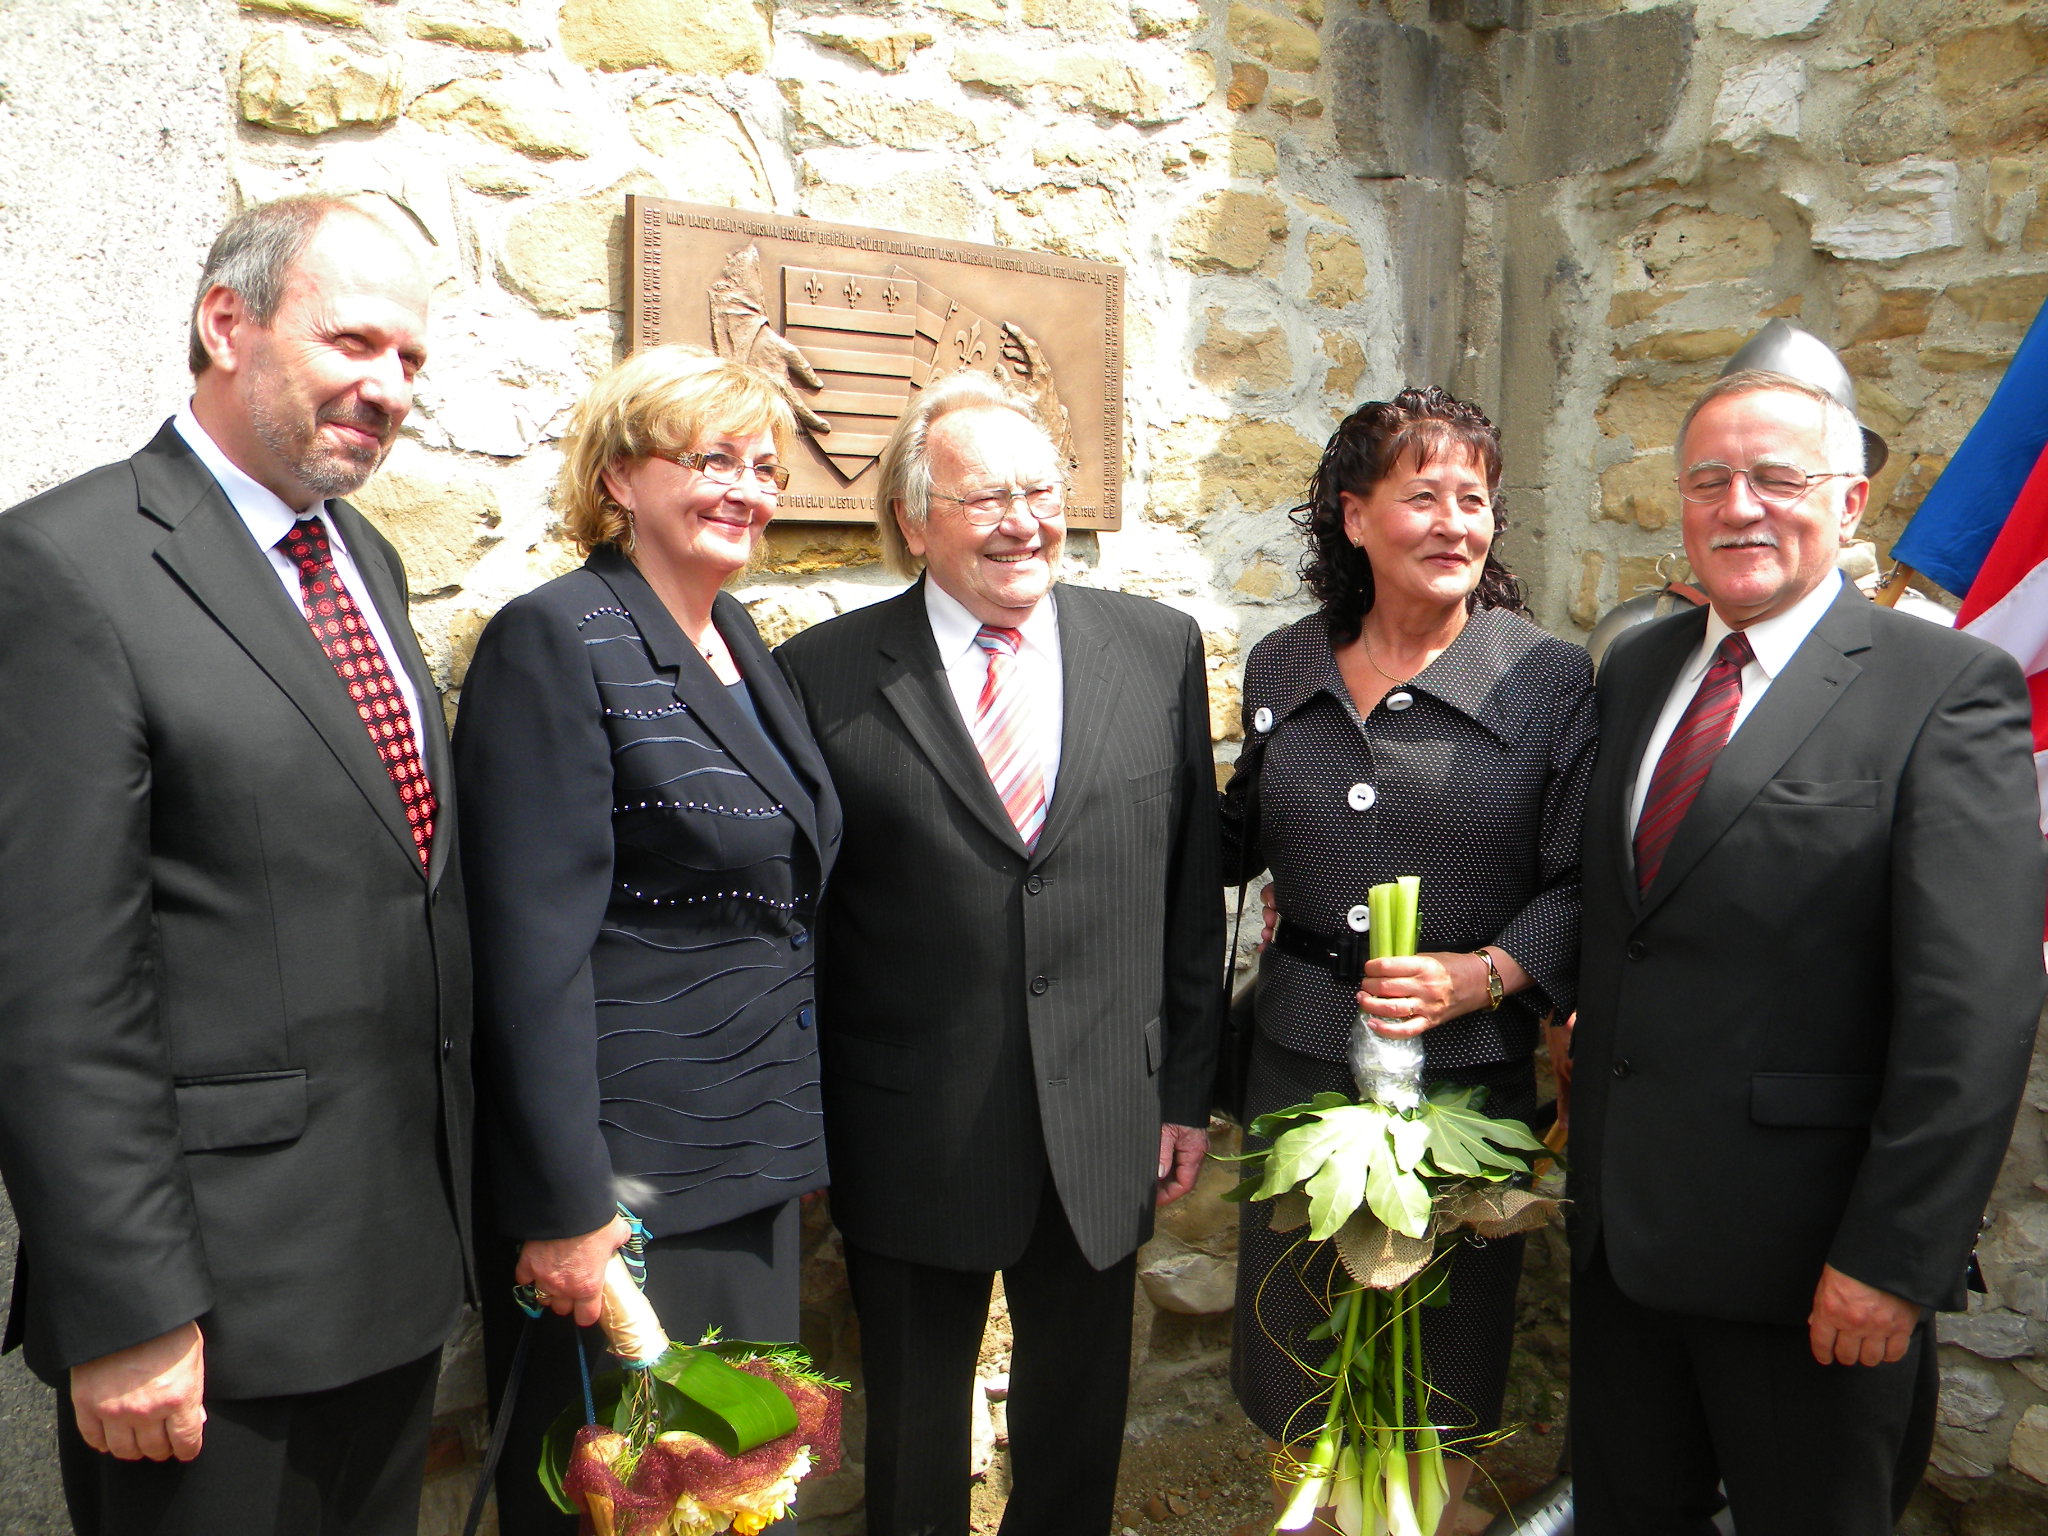 After inauguration of the memorial plaque